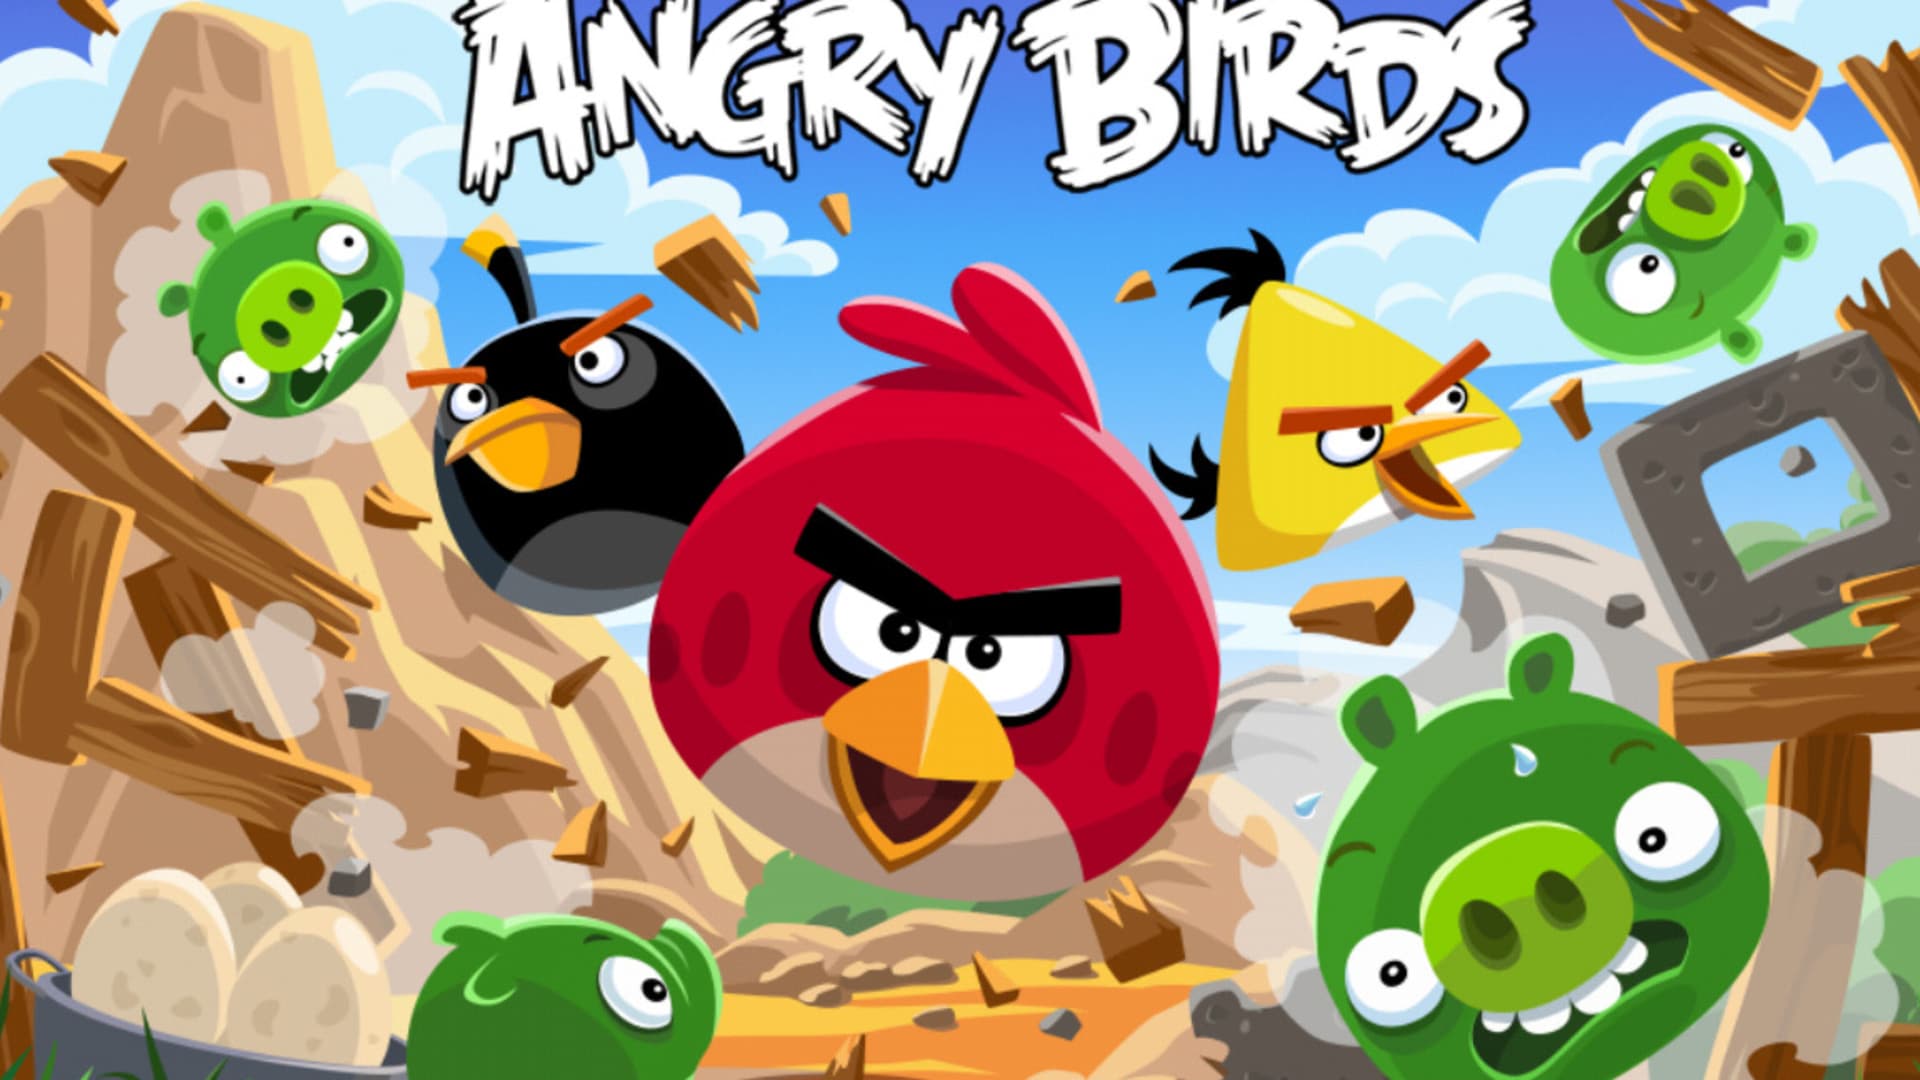 Settlement reached in Seattle artist's 'Angry Birds' lawsuit